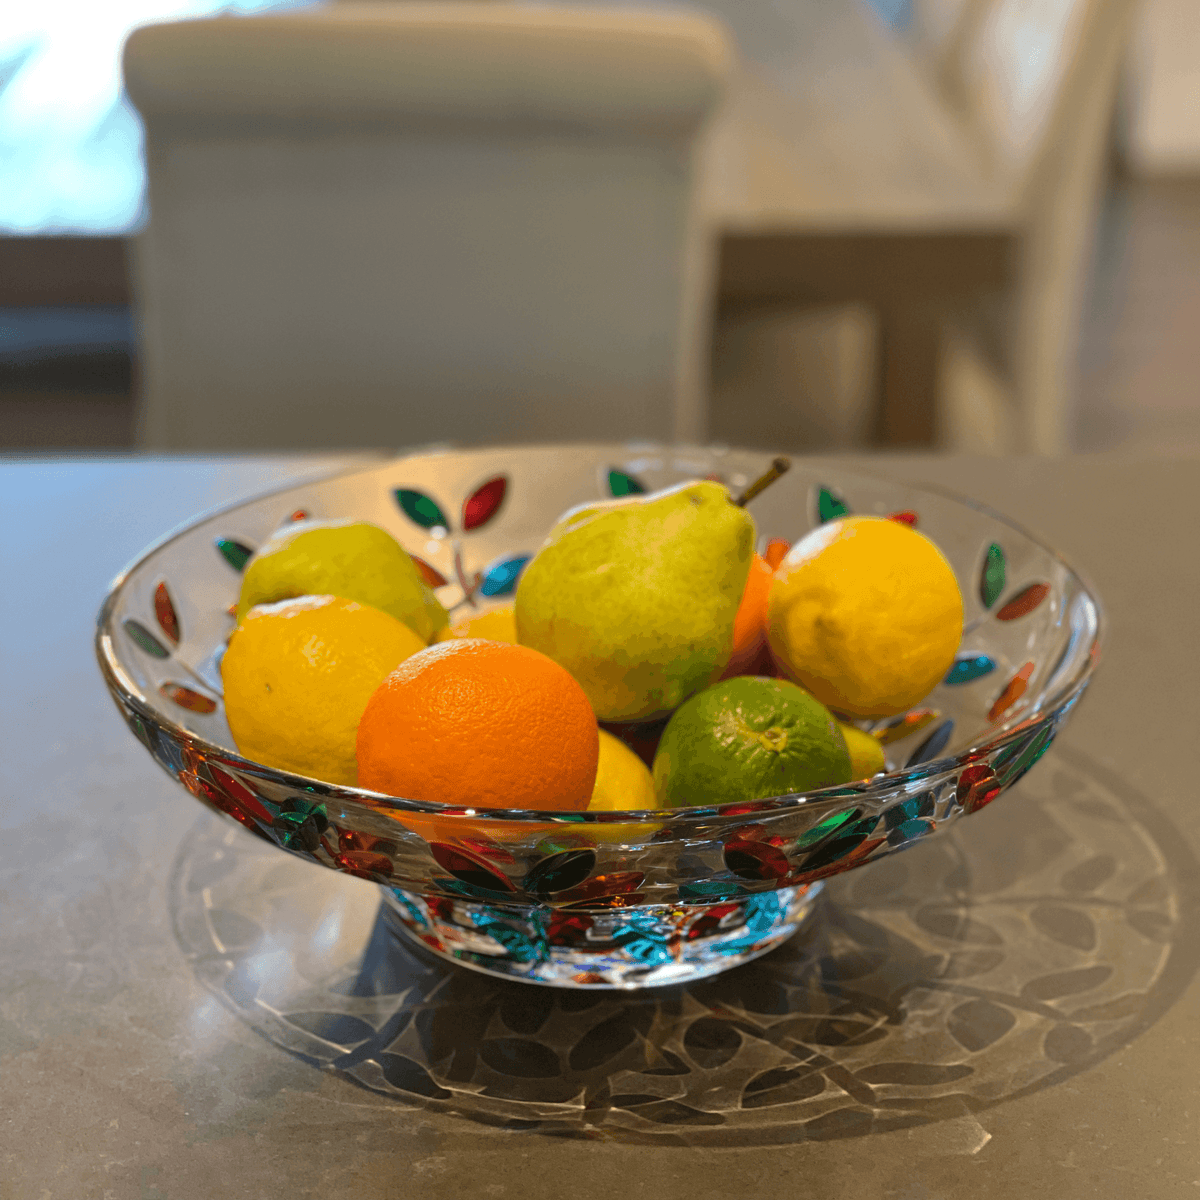 Flowervine Decorative Glass Centerpiece Bowl, Hand Painted, Made In Italy at MyItalianDecor